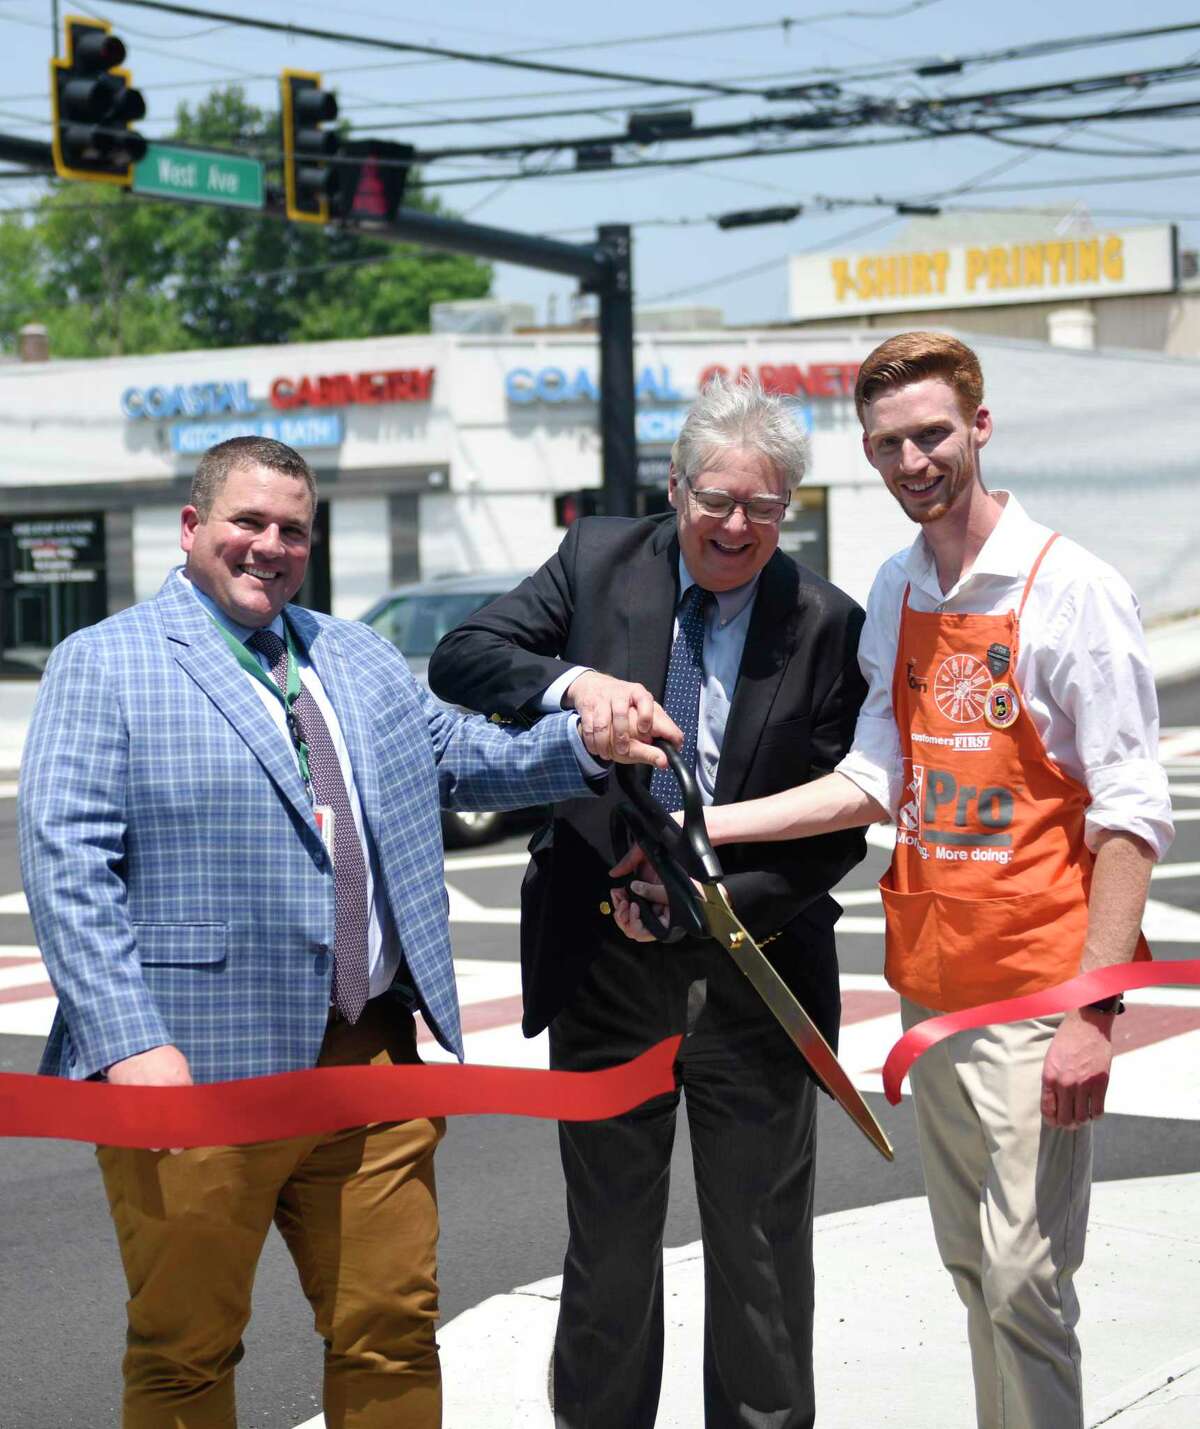 Stamford Transportation, Traffic & Parking Interim Bureau Chief Frank Petise, left, Stamford Mayor David Martin, center, and Home Depot Supervisor John Vincent cut the ribbon at the new and improved intersection of West Avenue and West Main Street in Stamford, Conn. Wednesday, July 7, 2021. The problematic intersection was recently renovated to add turning lanes from each direction to improve traffic flow.